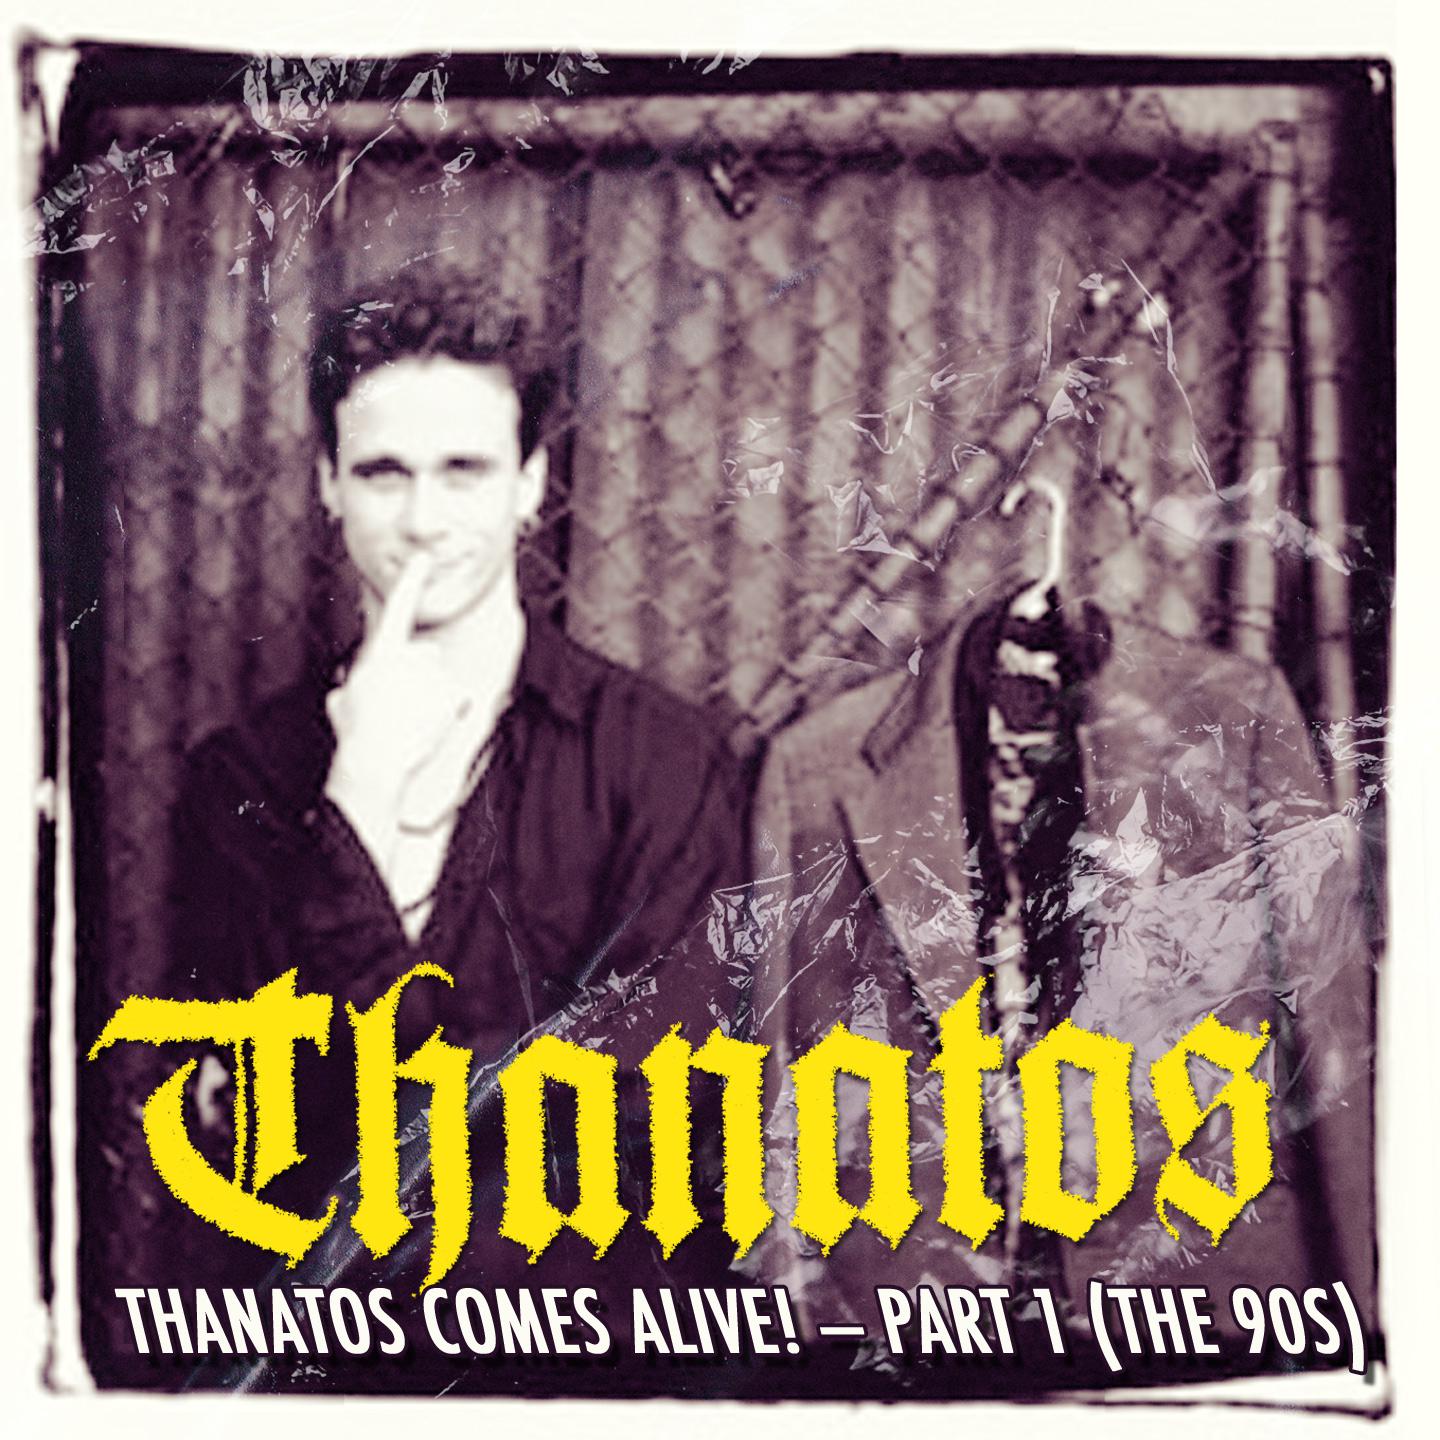 Thanatos - The Wait Smothers Me (Live at Tremont Music Hall, Charlotte NC, ’96)